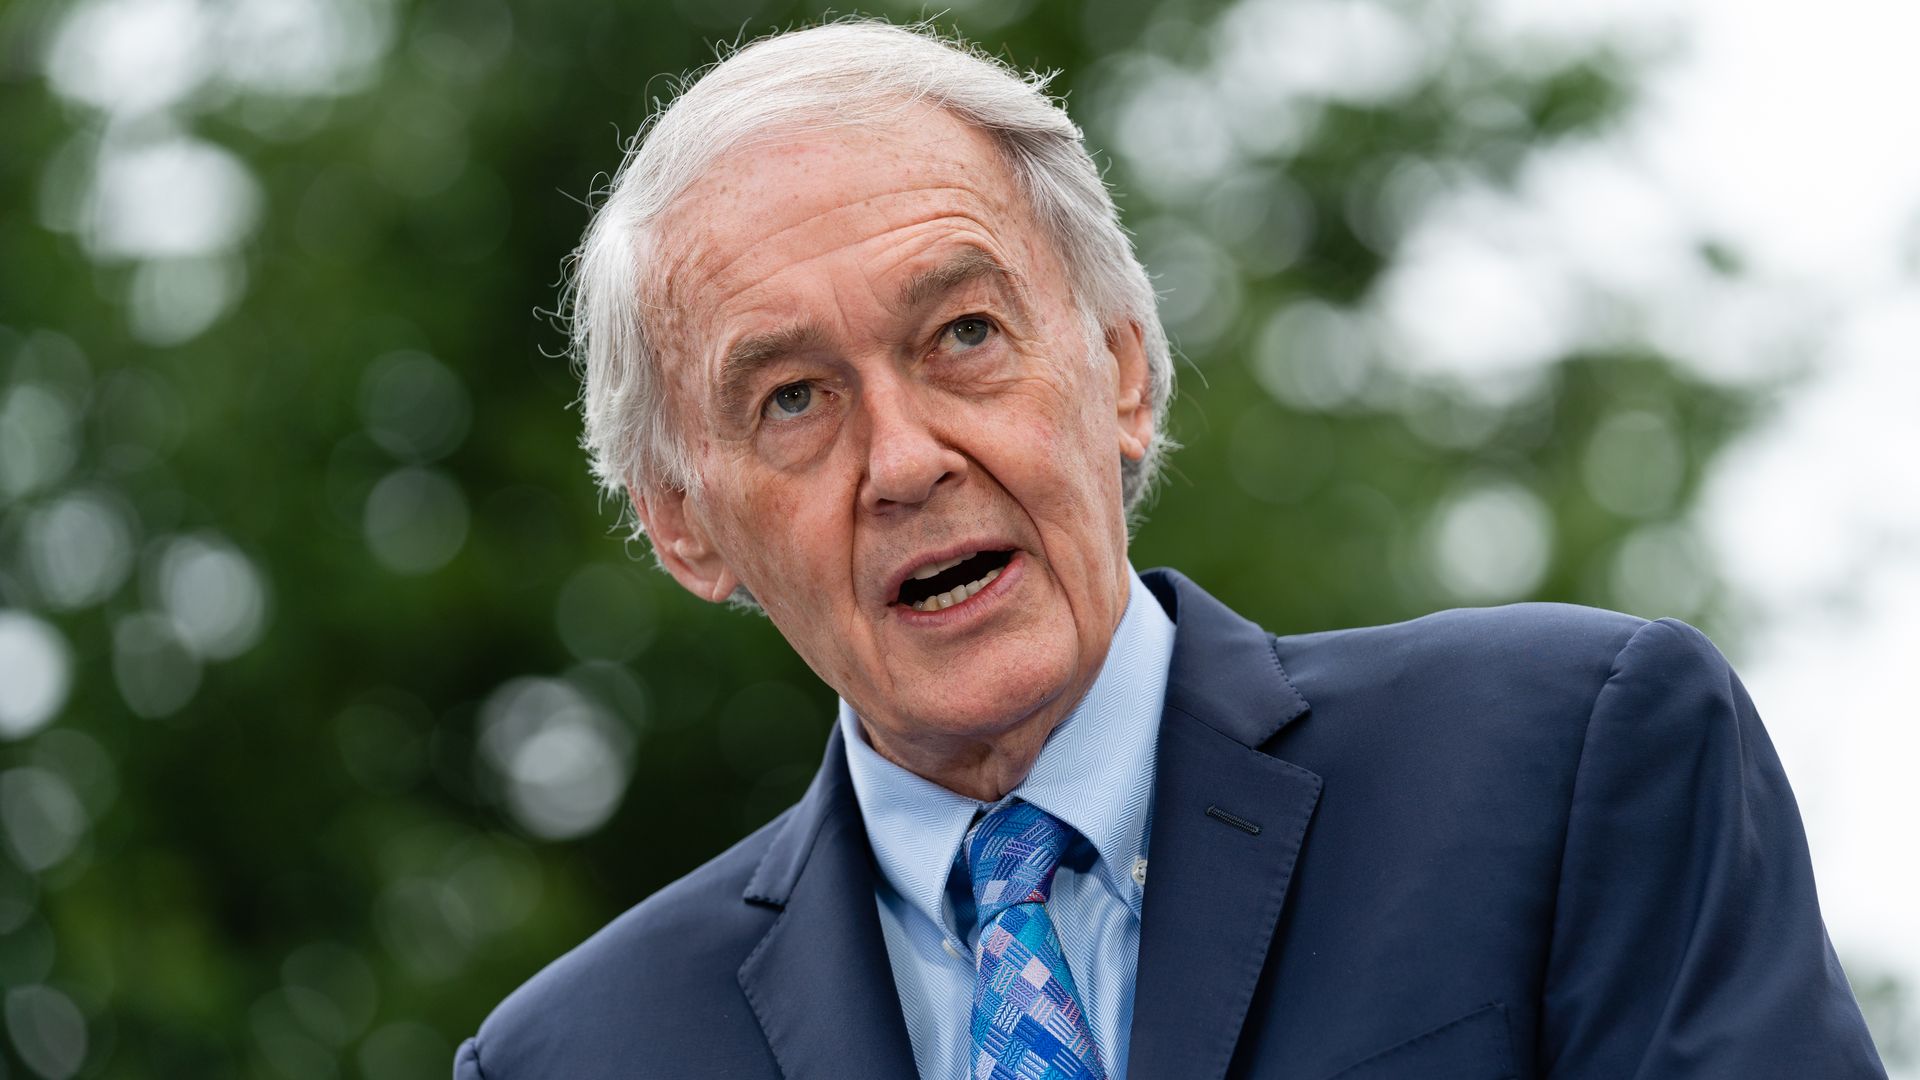 Senator Ed Markey, a Democrat from Massachusetts, speaks during a news conference on the Right to Contraception Act outside the US Capitol in Washington, D.C., US, za